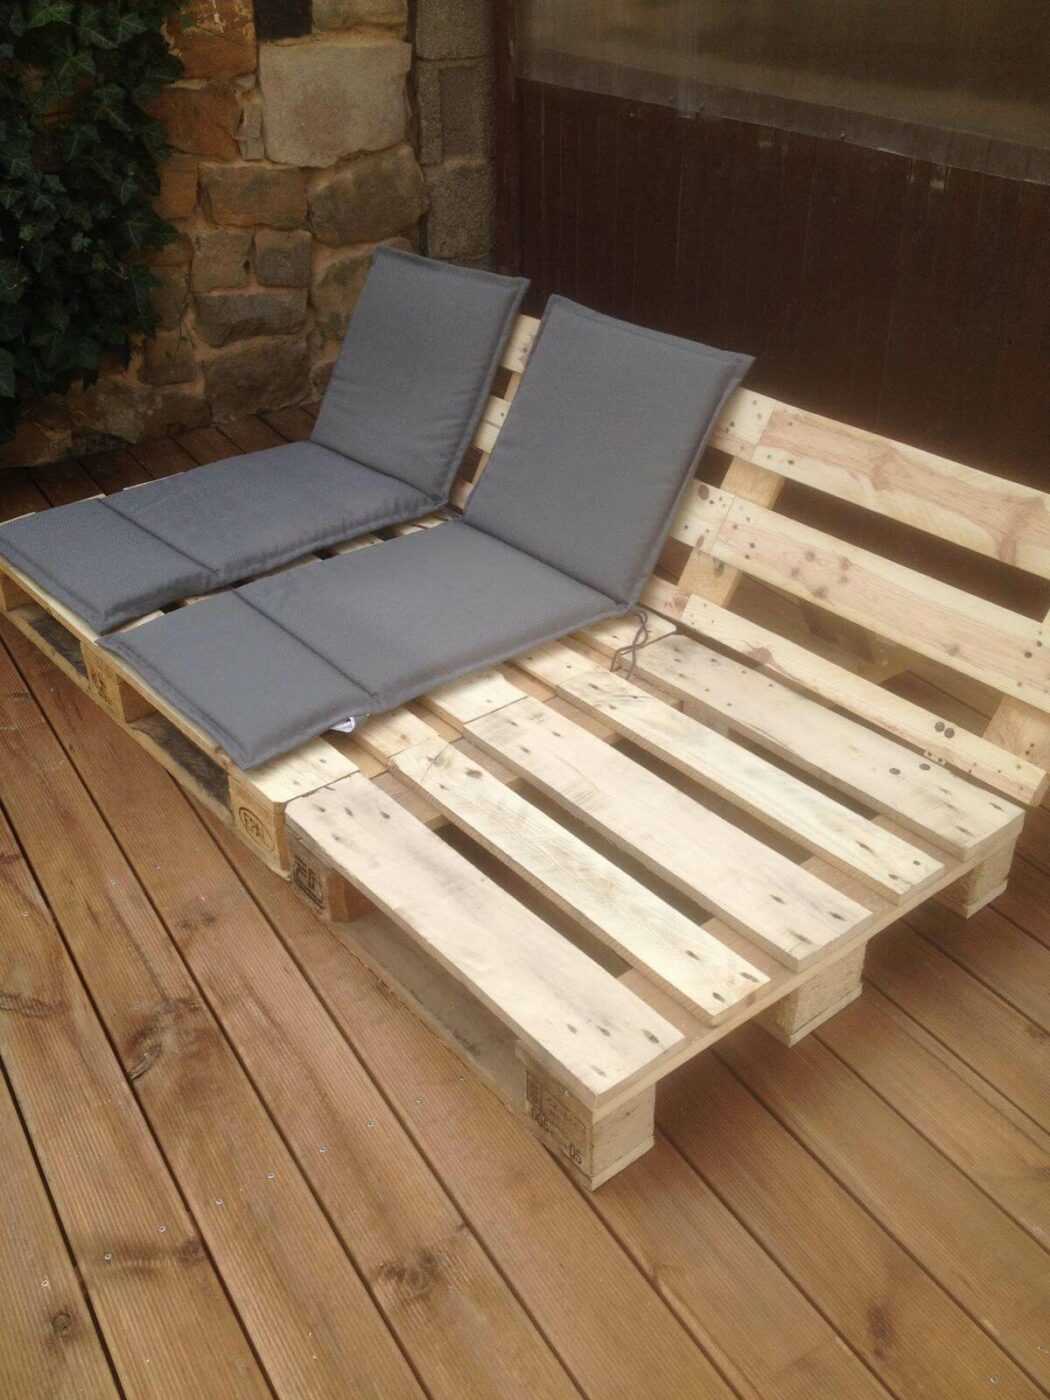 Reclining Seats for Your Patio or Deck